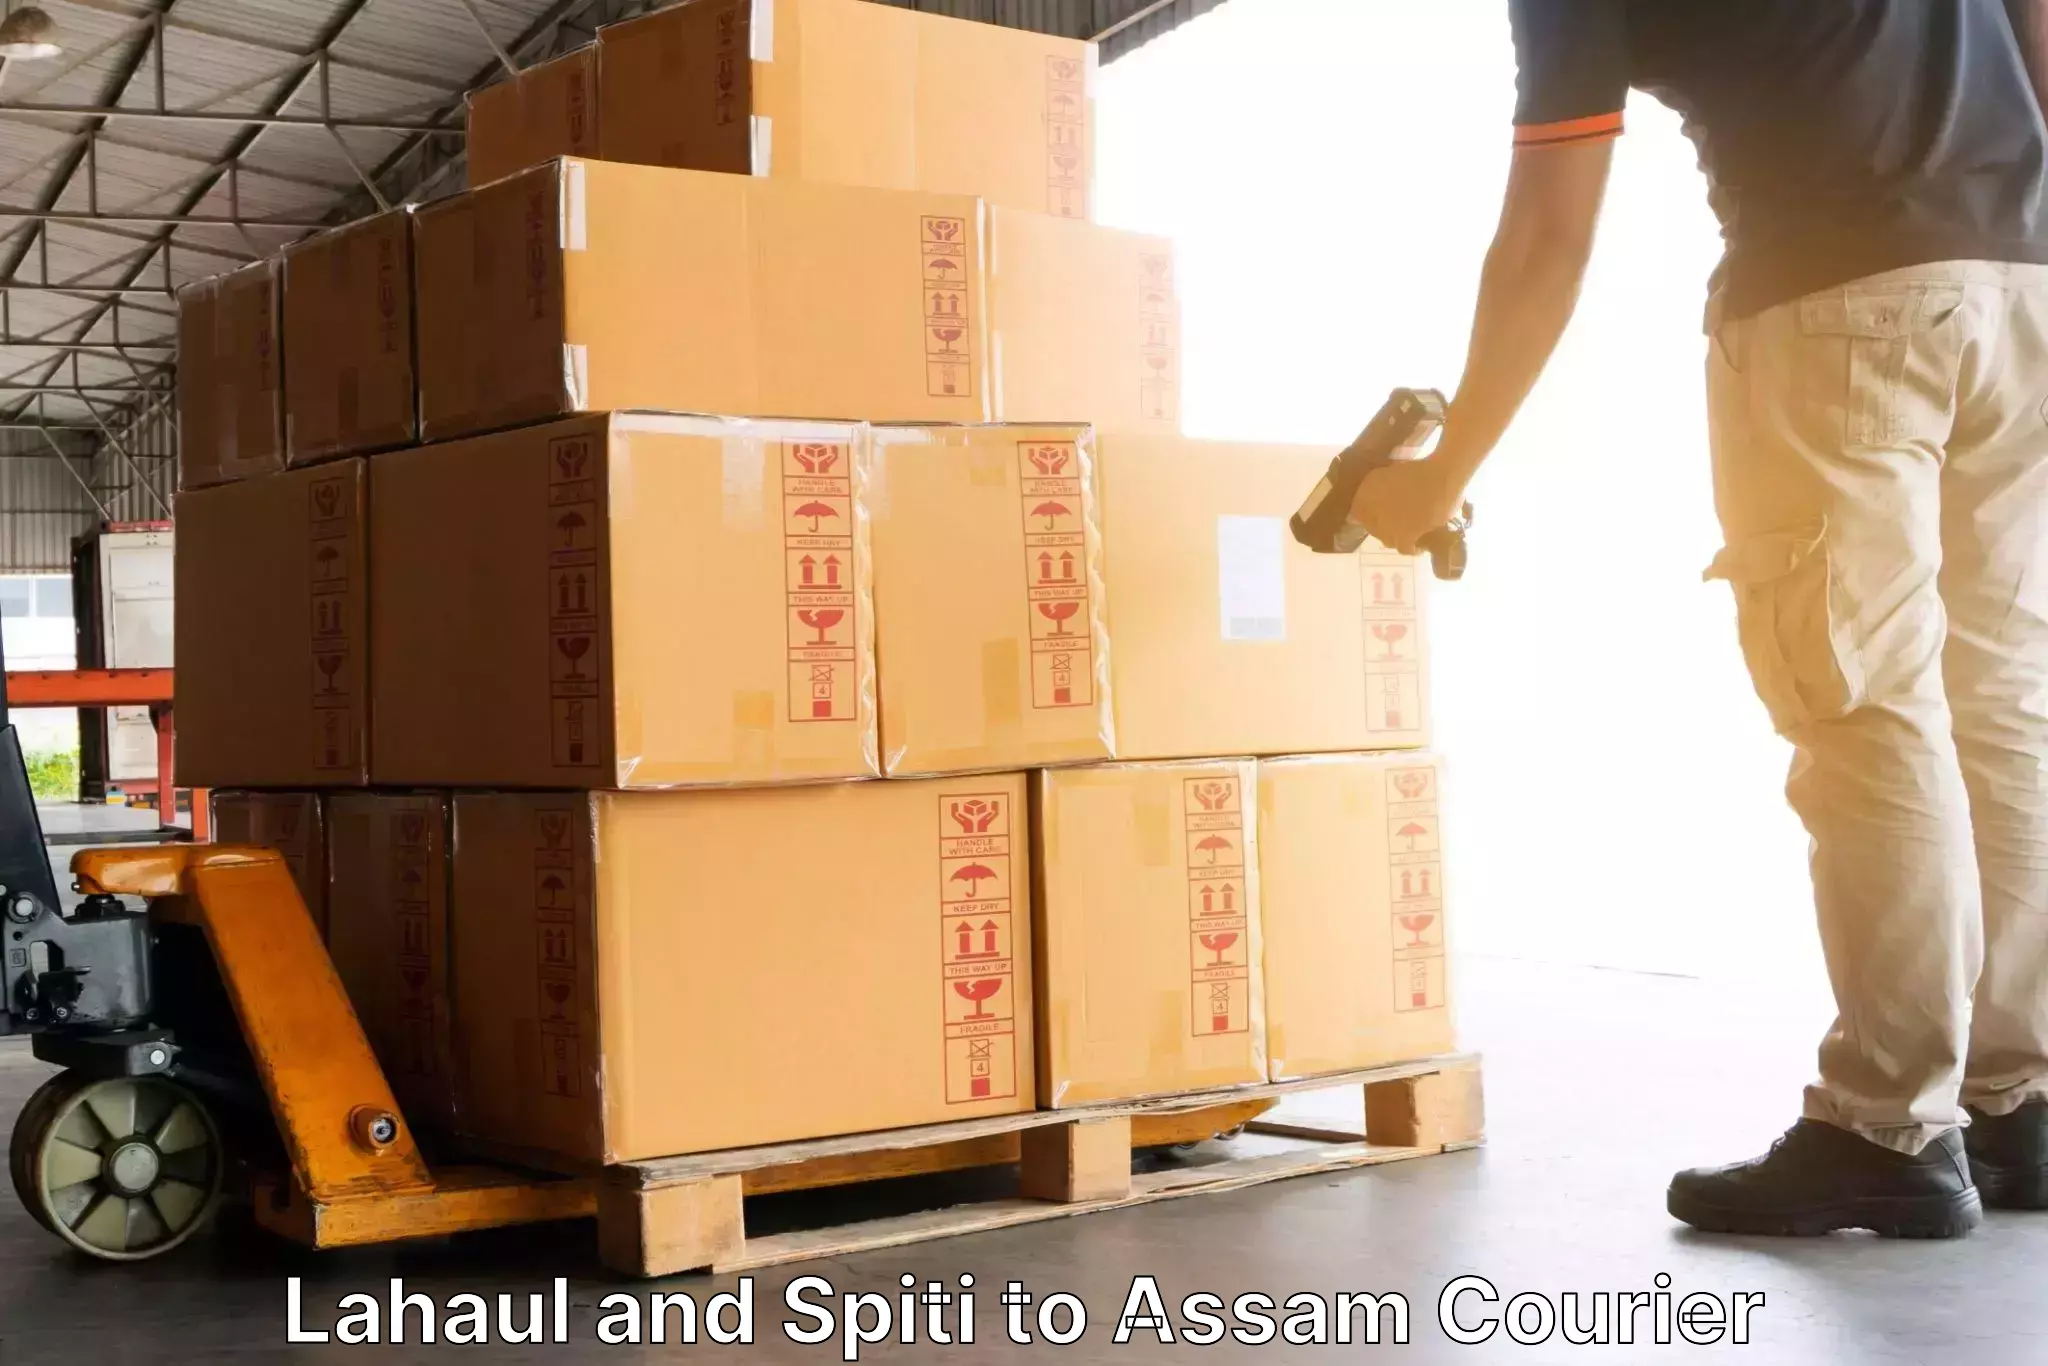 Automated shipping processes Lahaul and Spiti to Thelamara